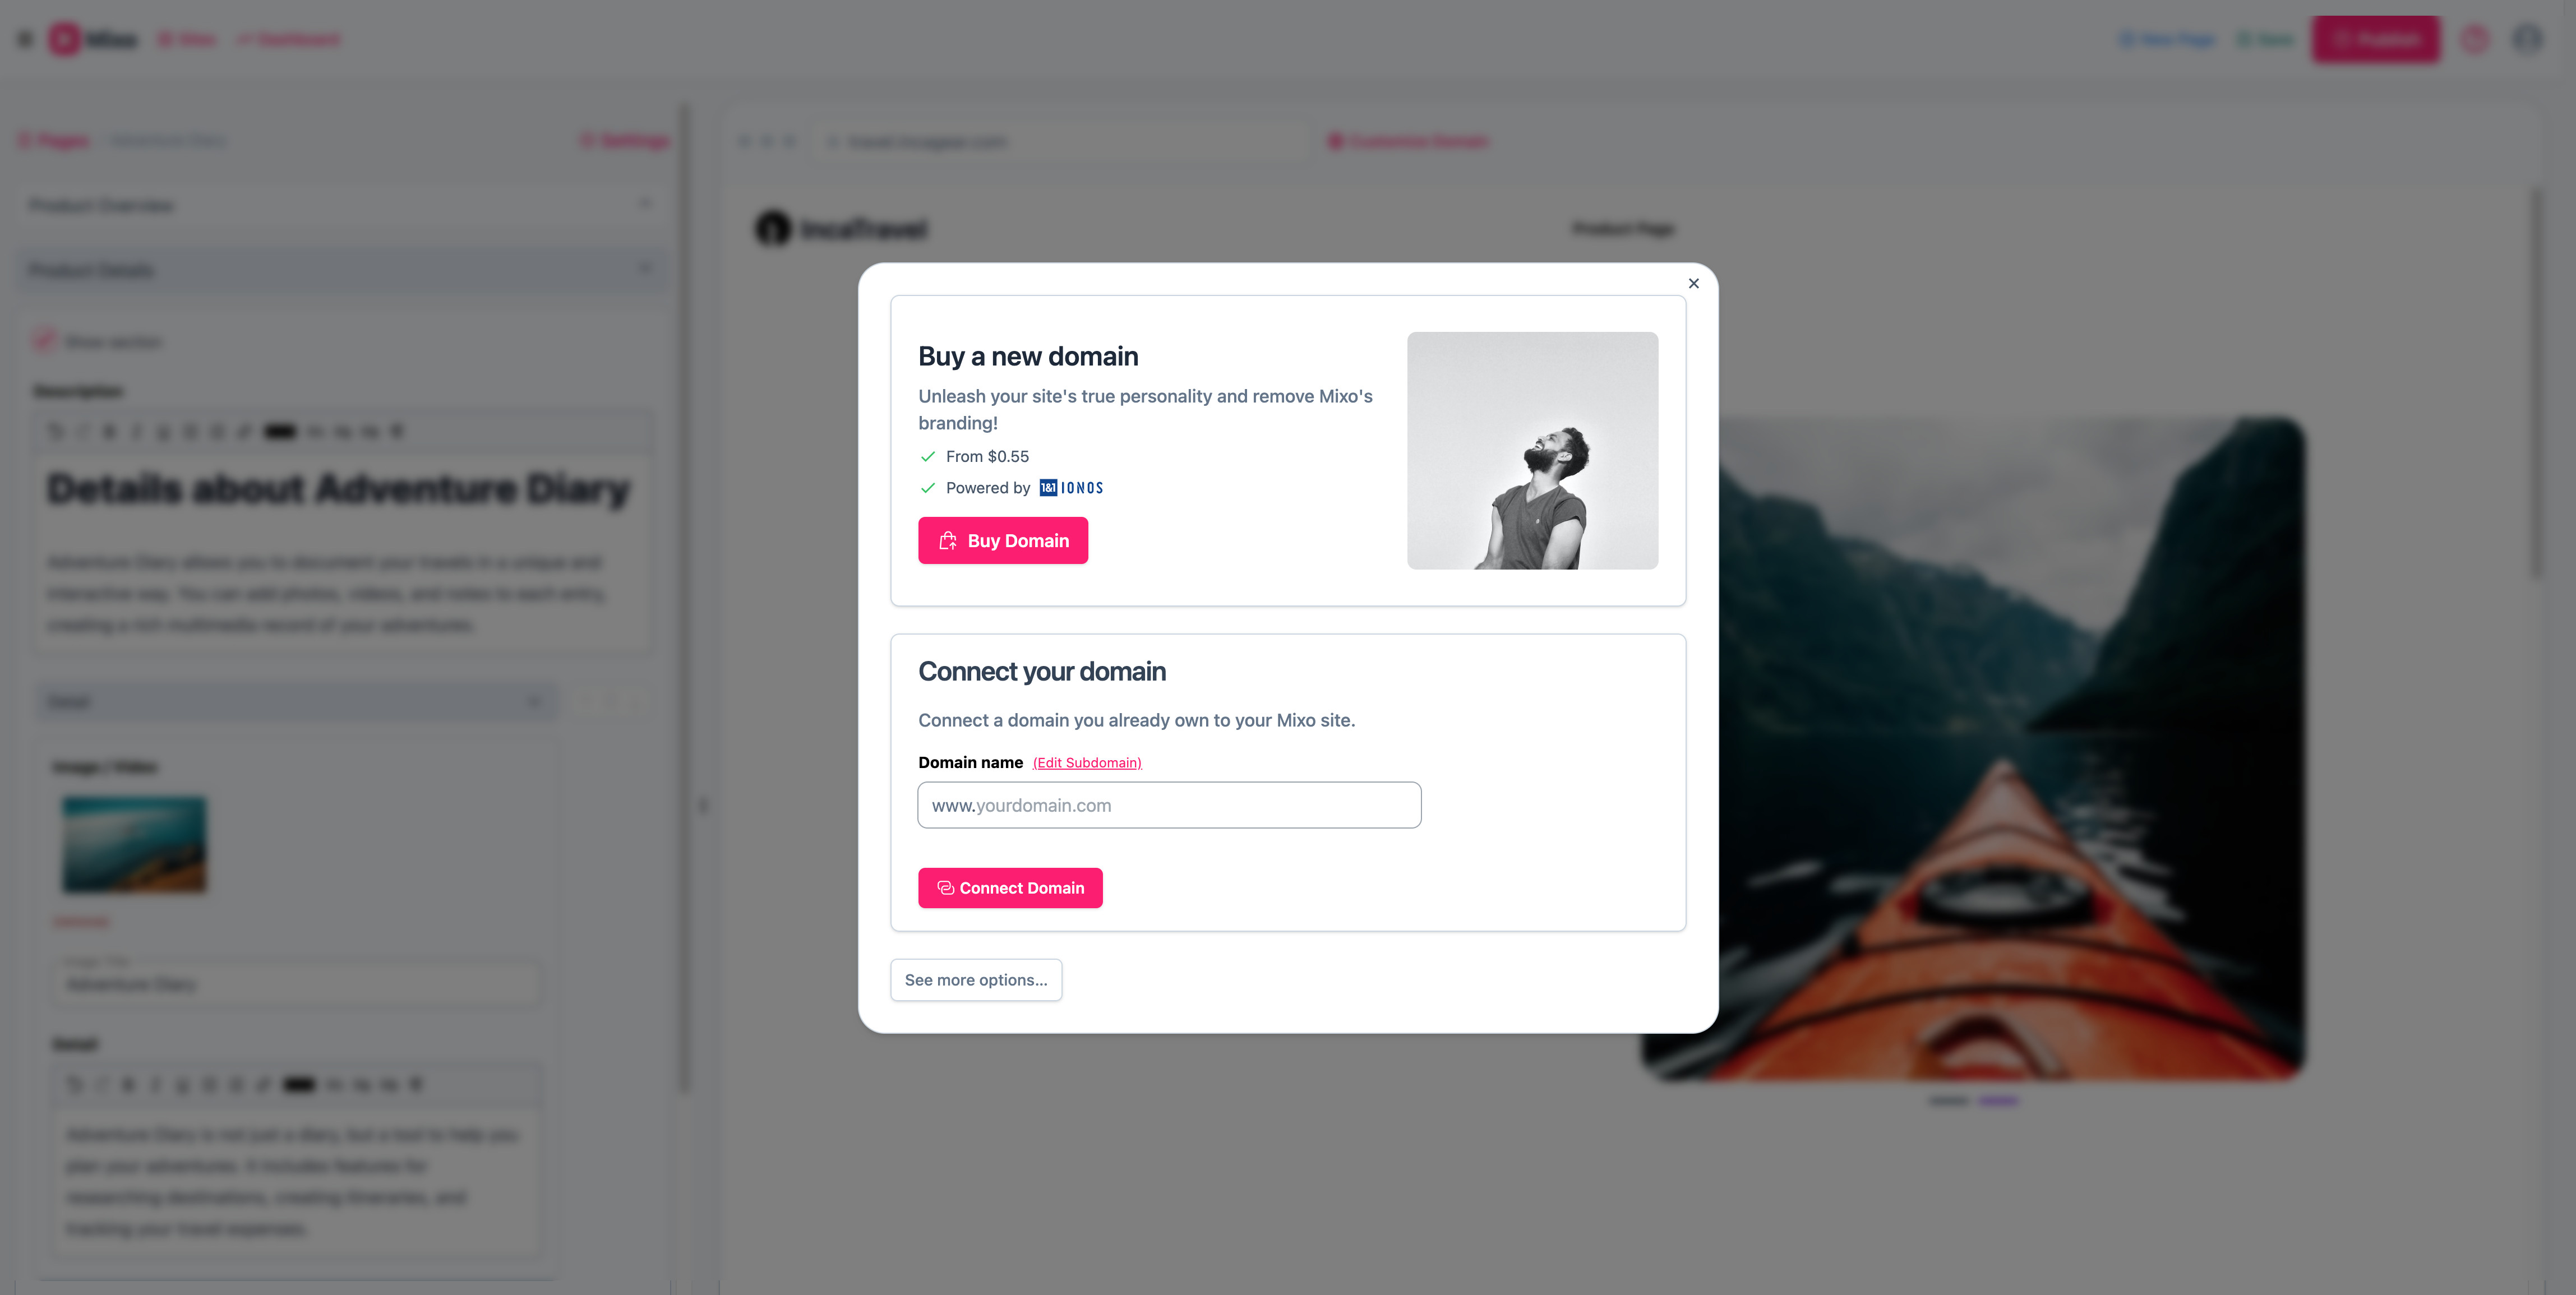 Ability to customize the url: With Mixo, enhance your branding with personalized URLs. Connect your custom domain easily and showcase your brand's uniqueness online.